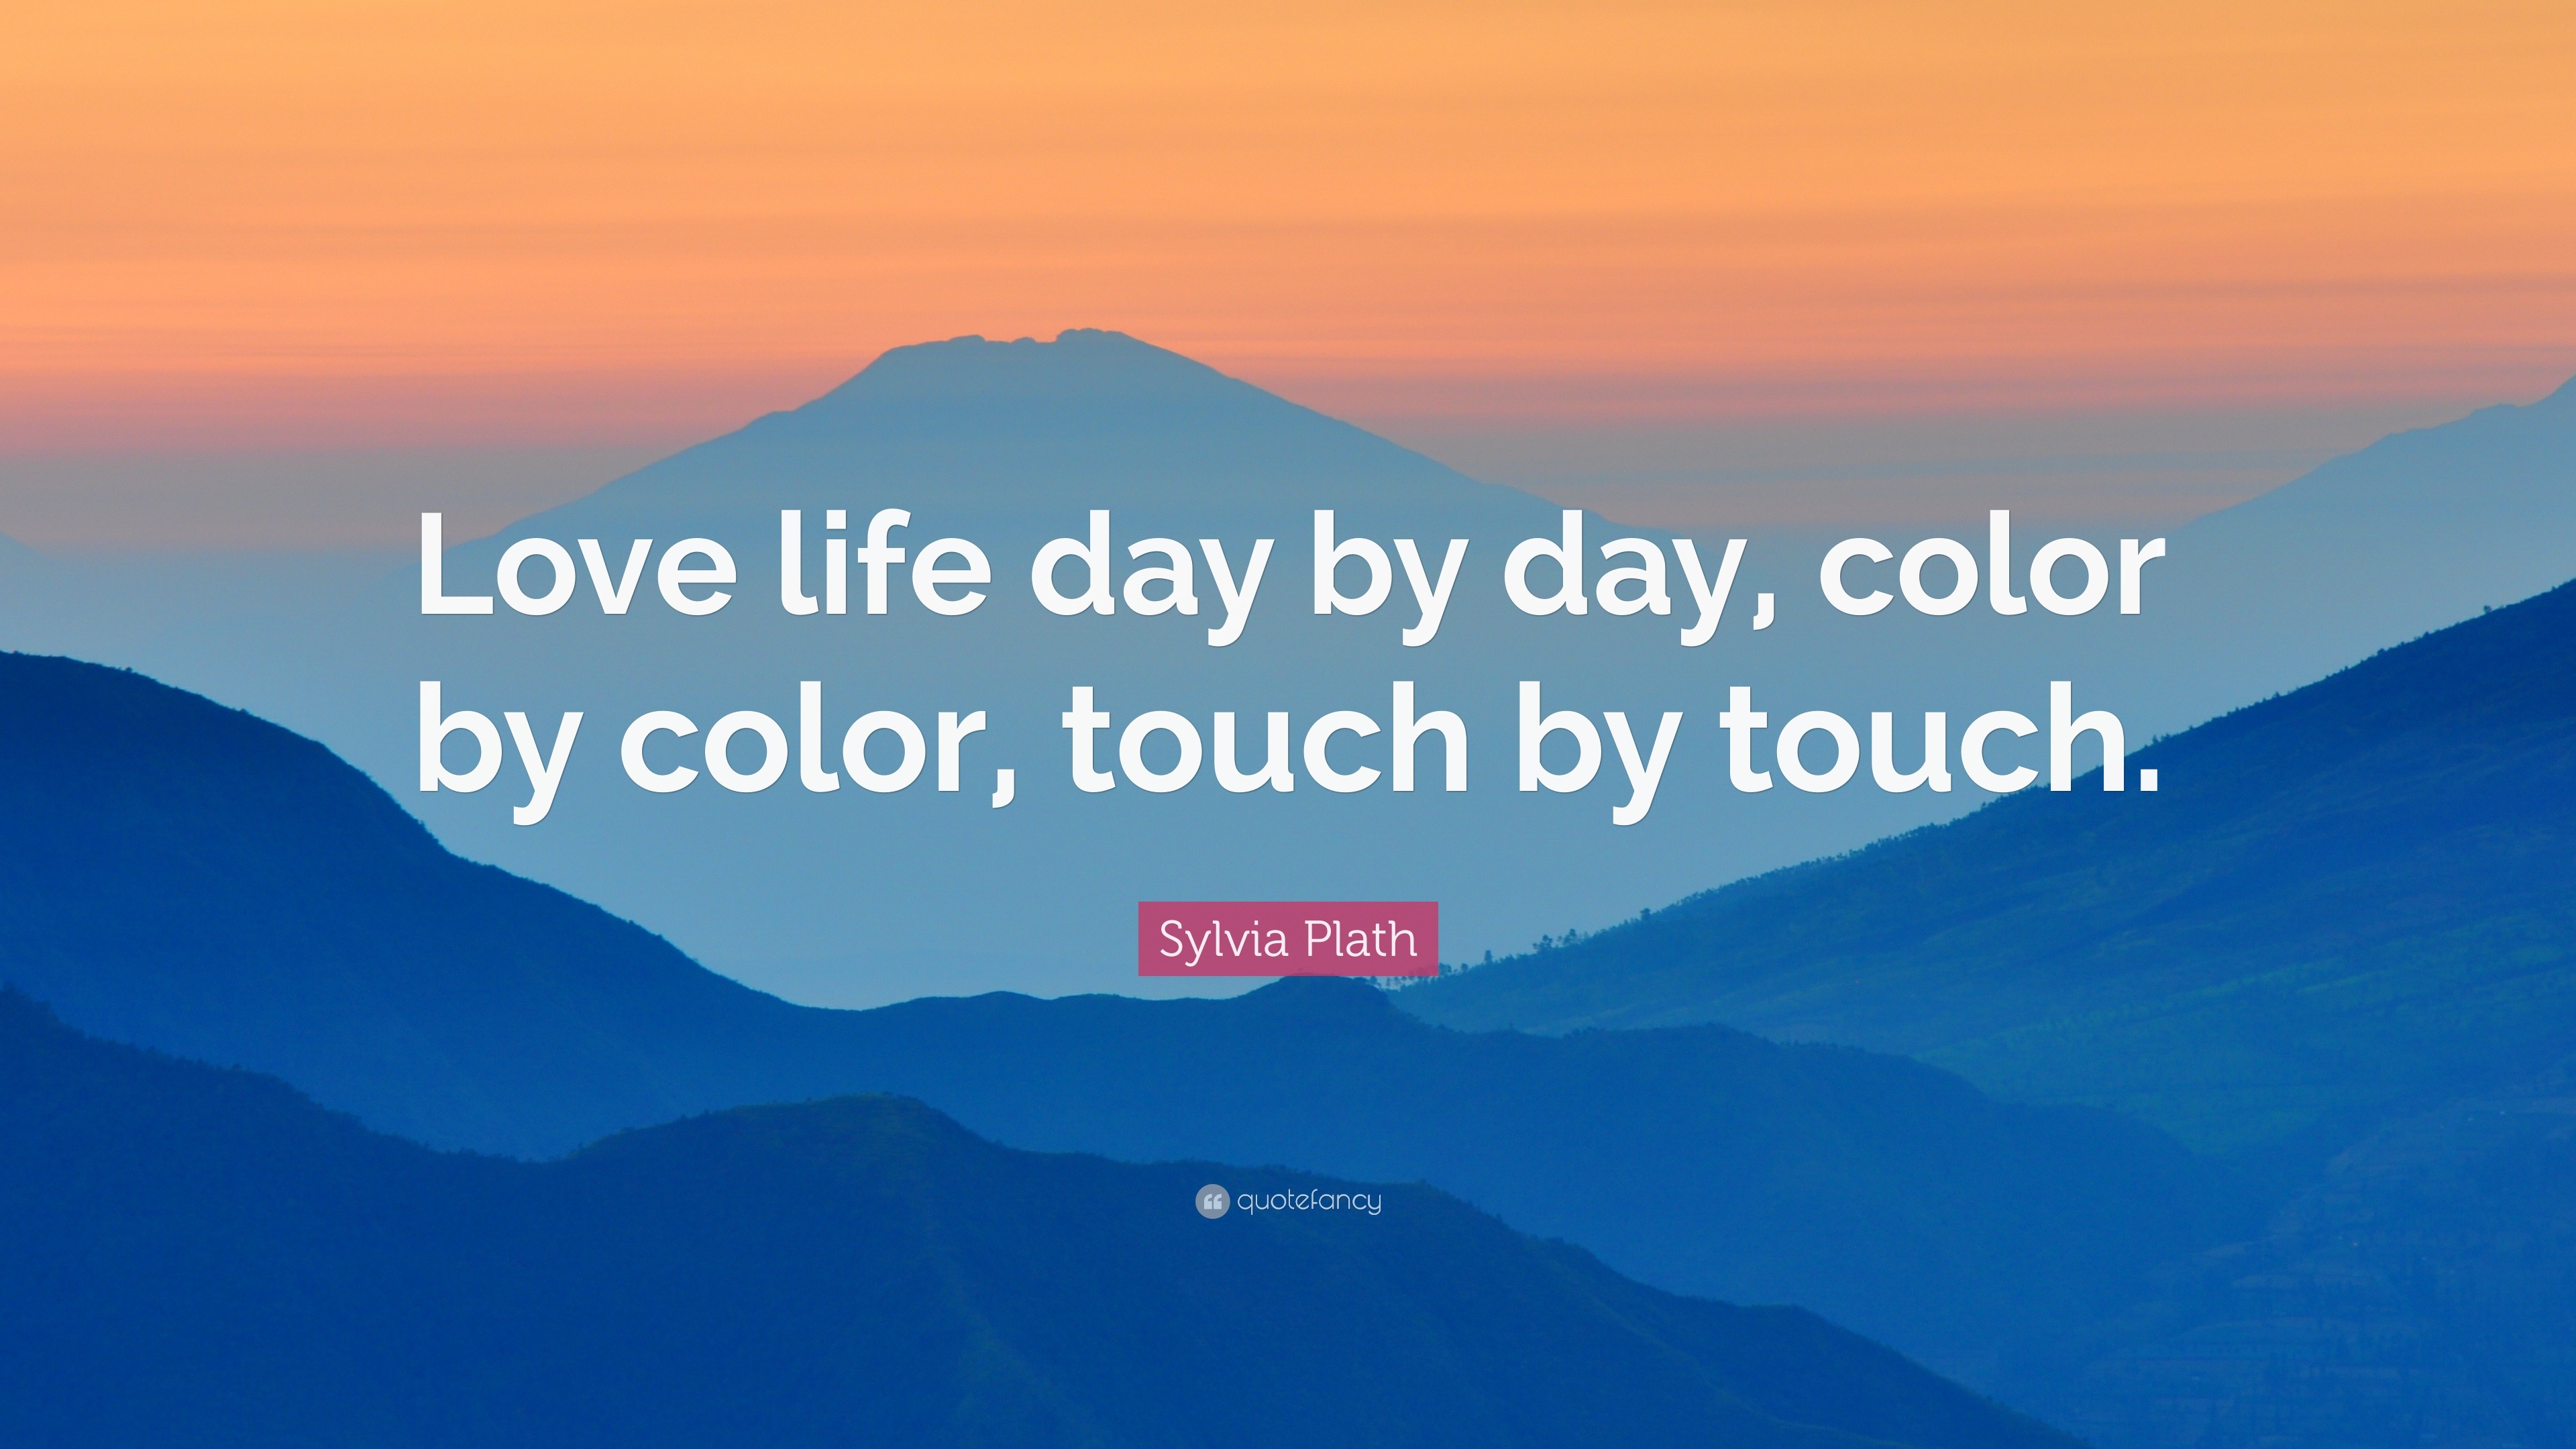 Sylvia Plath Quote “Love life day by day color by color touch